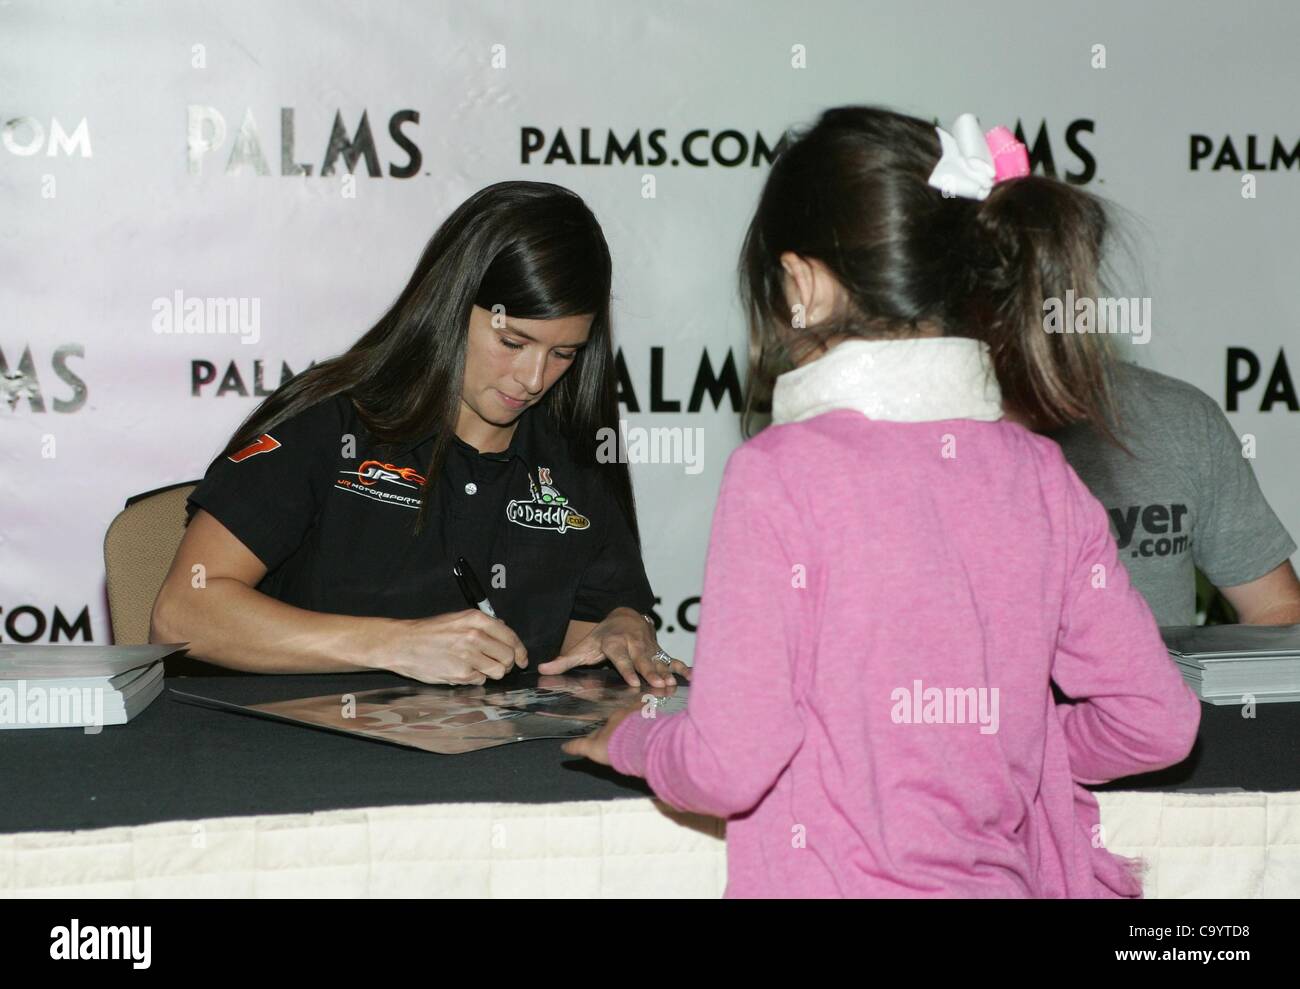 Danica Patrick, young fan in attendance for JR Motorsports Presents NASCAR Autograph Signing, Palms Casino Resort Hotel, Las Vegas, NV March 9, 2012. Photo By: James Atoa/Everett Collection Stock Photo